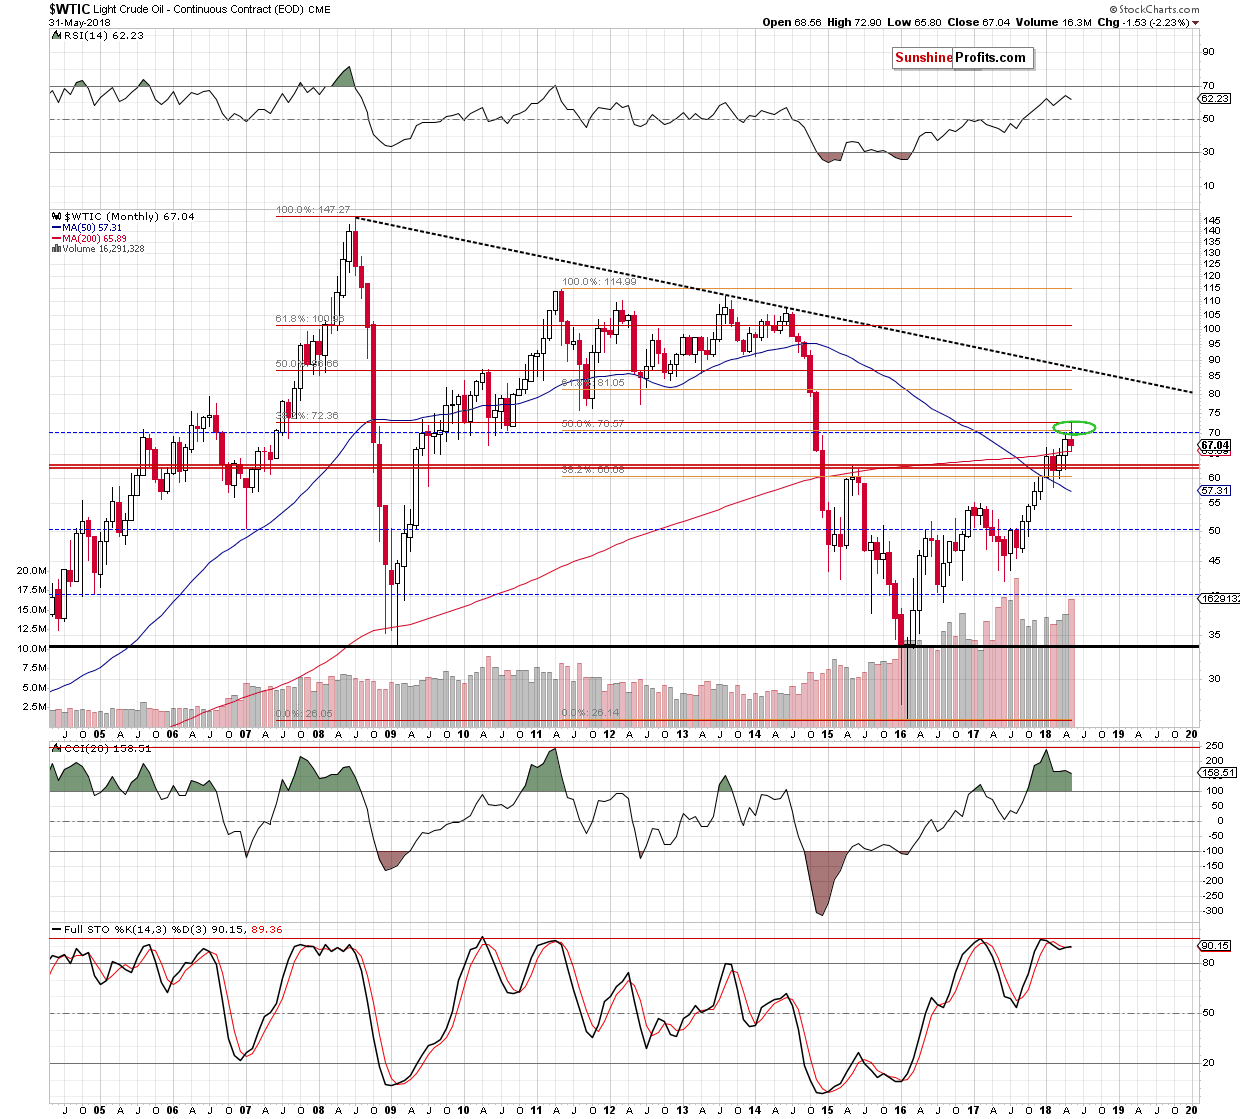 Crude Oil WTIC monthly chart